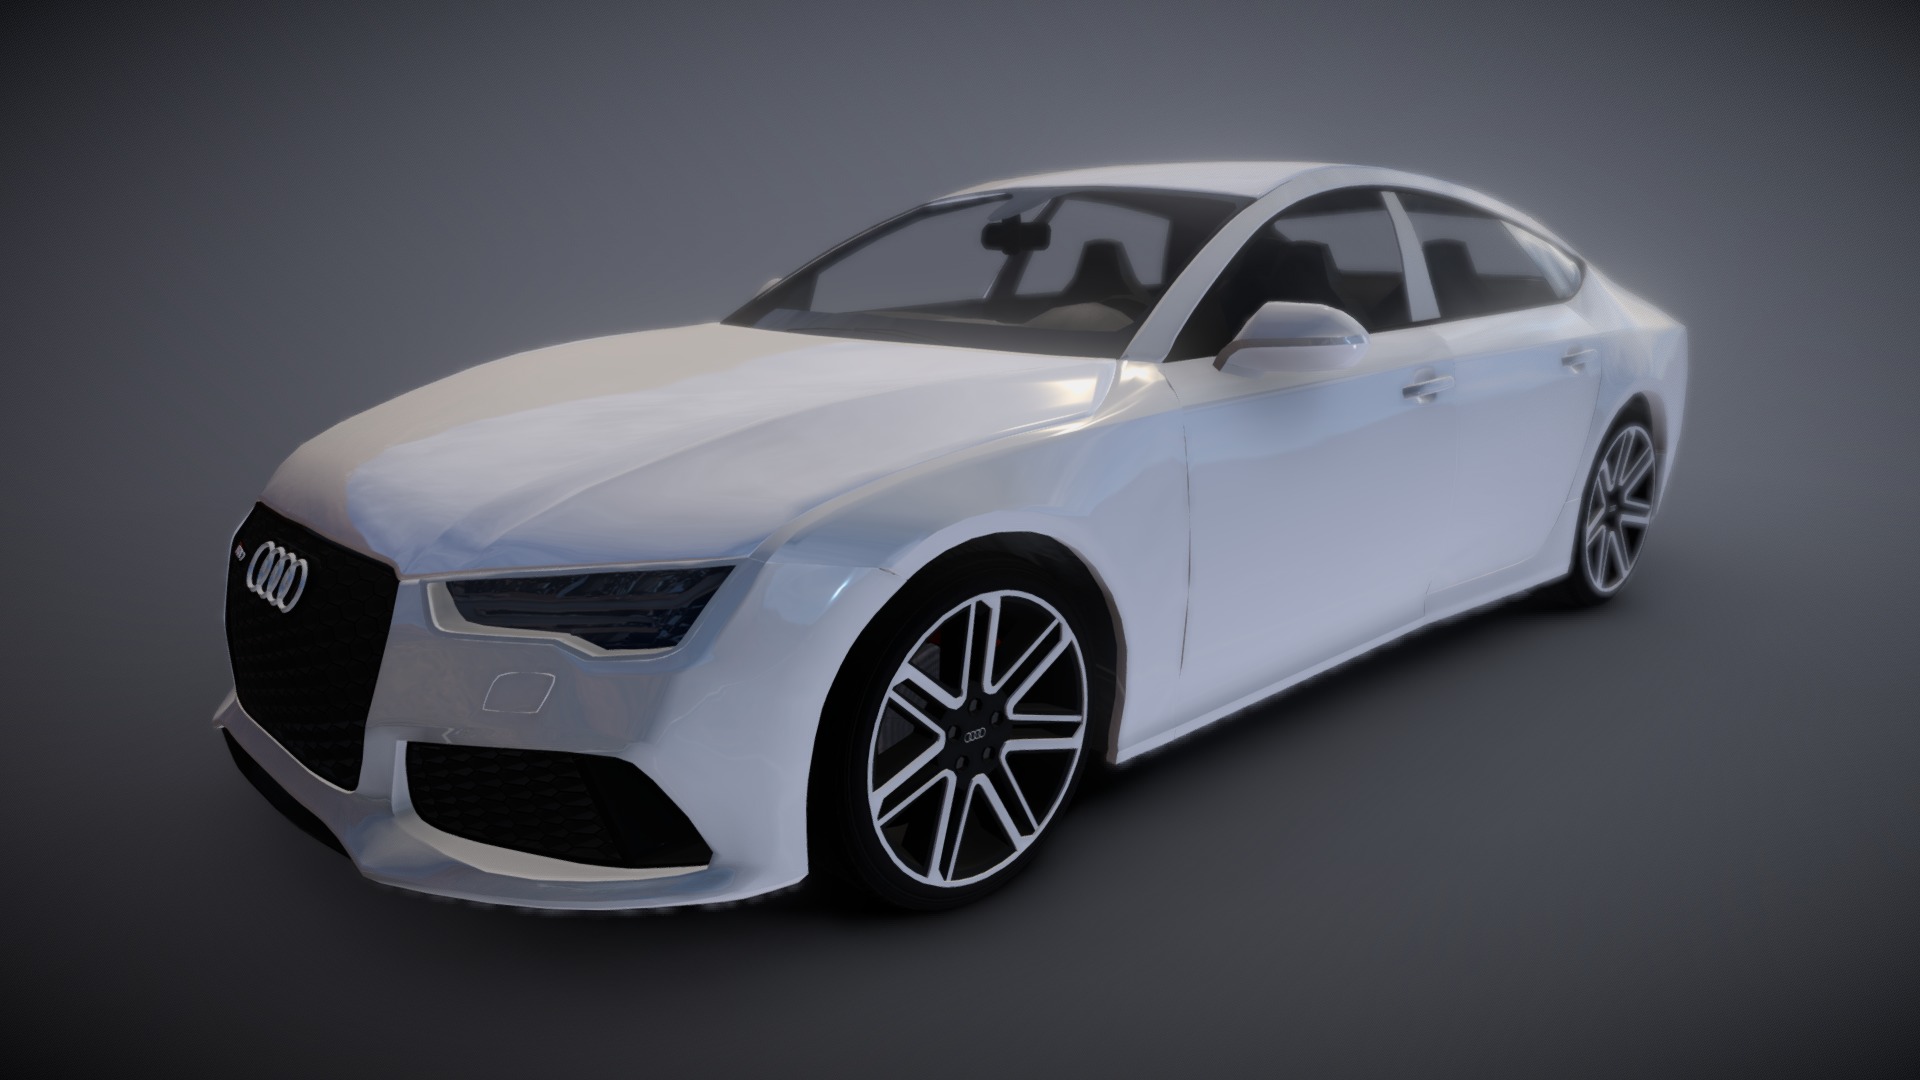 3D model LowPoly Audi-rs7 - This is a 3D model of the LowPoly Audi-rs7. The 3D model is about a white car with a black background.